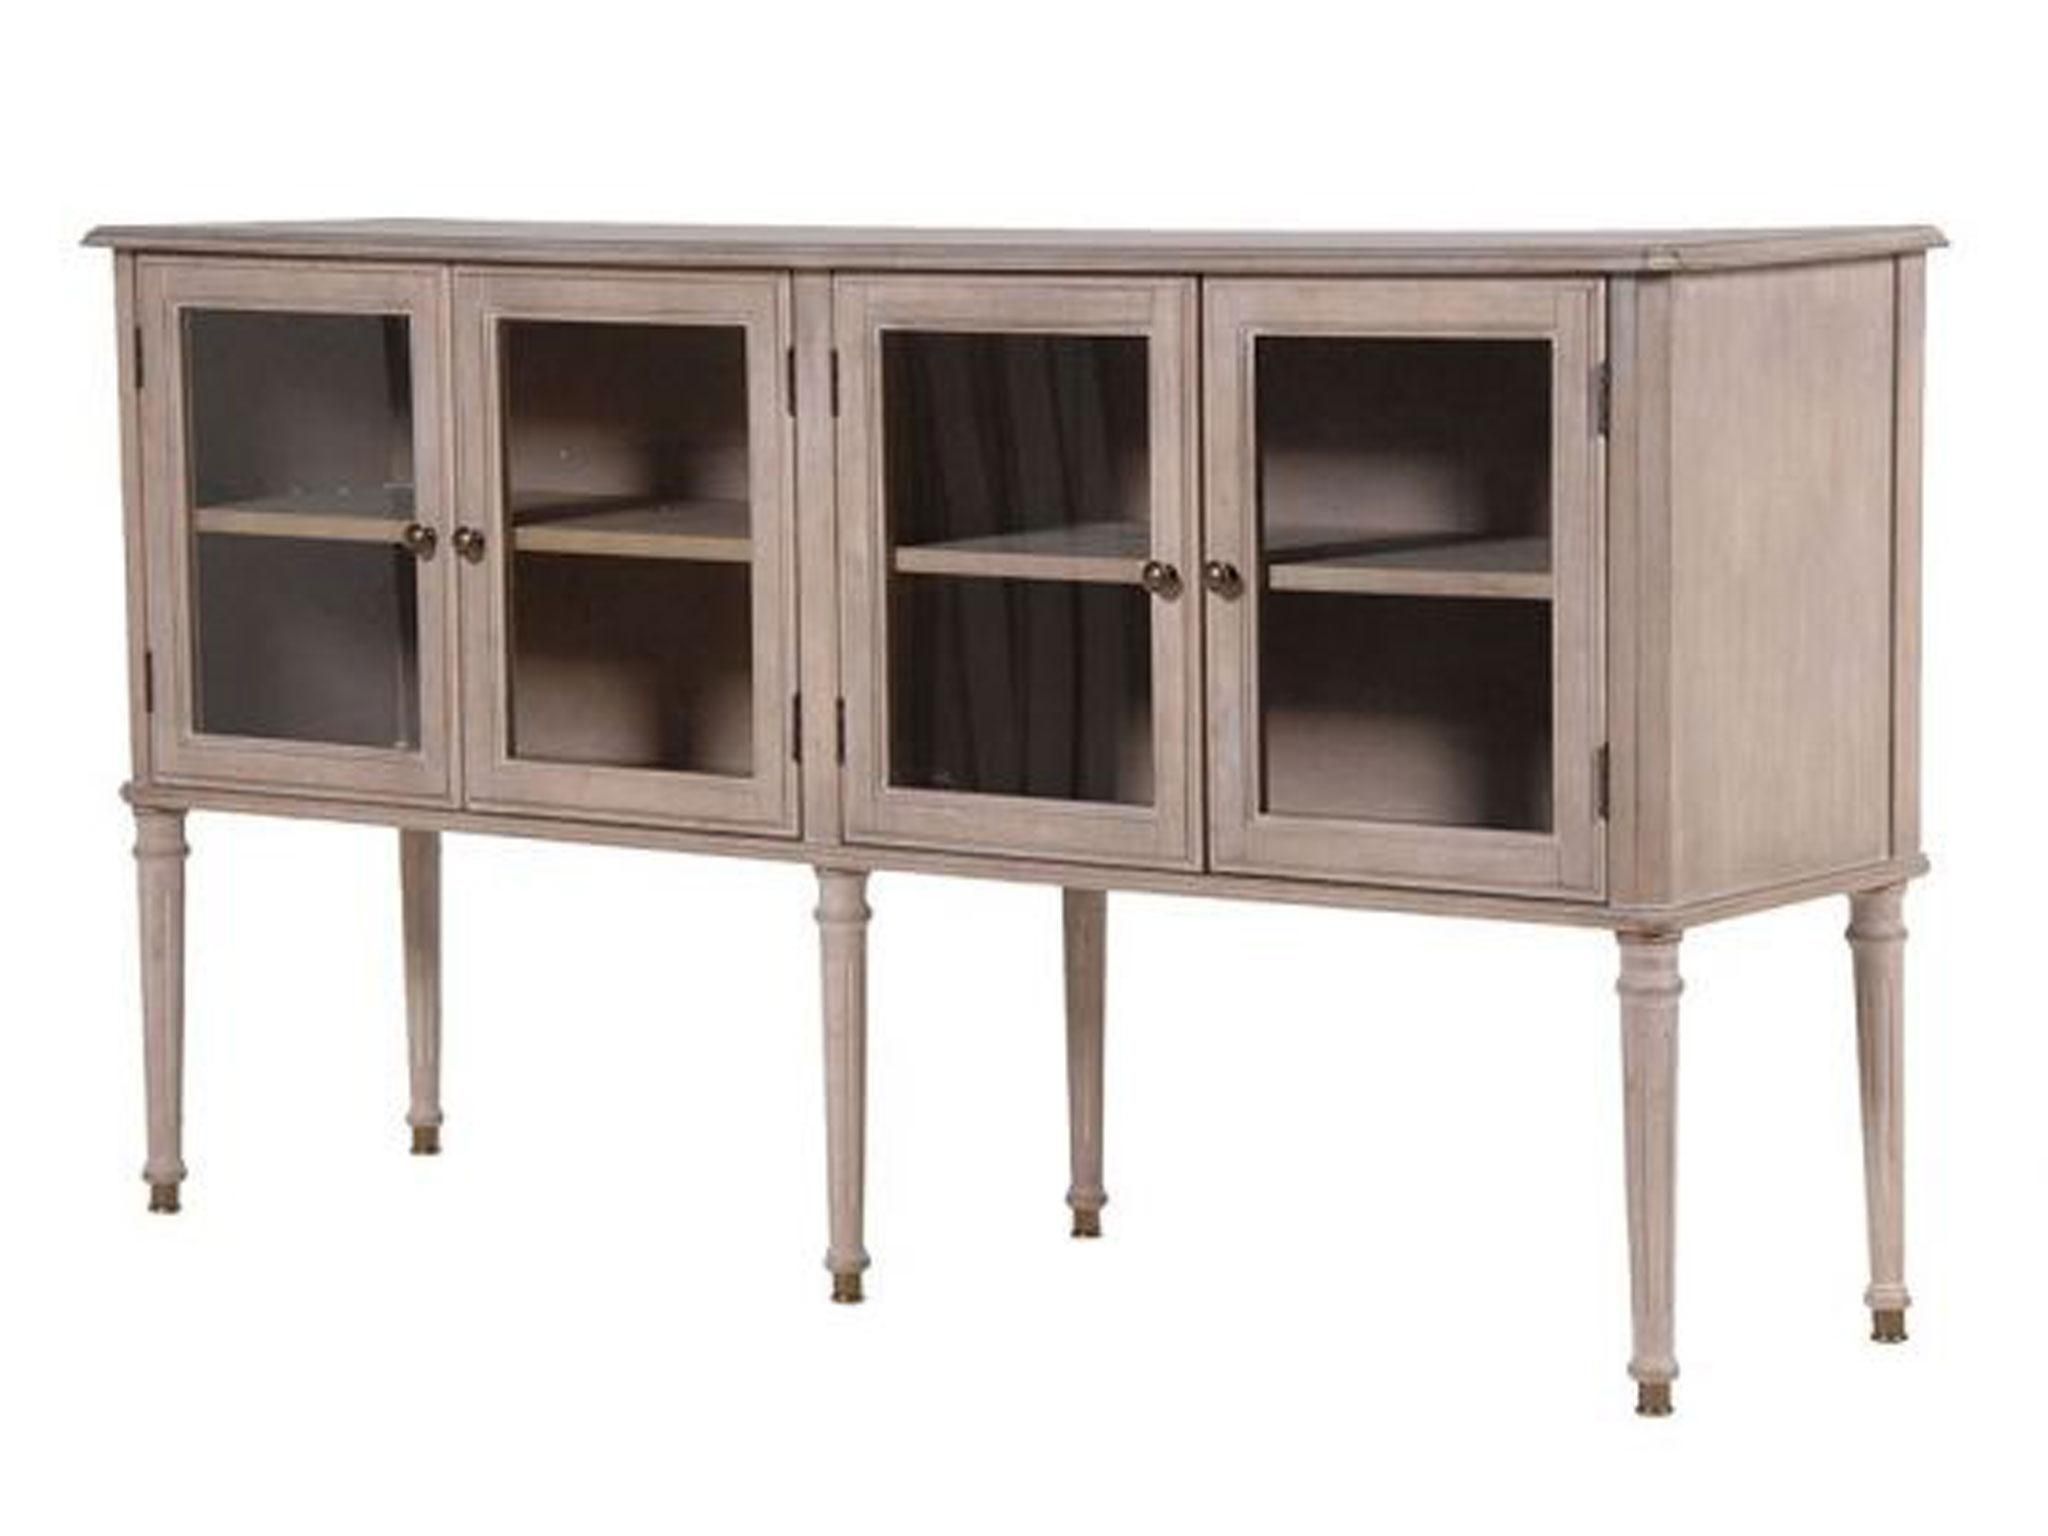 10 Best Sideboards | The Independent Inside Solar Refinement Sideboards (View 23 of 30)